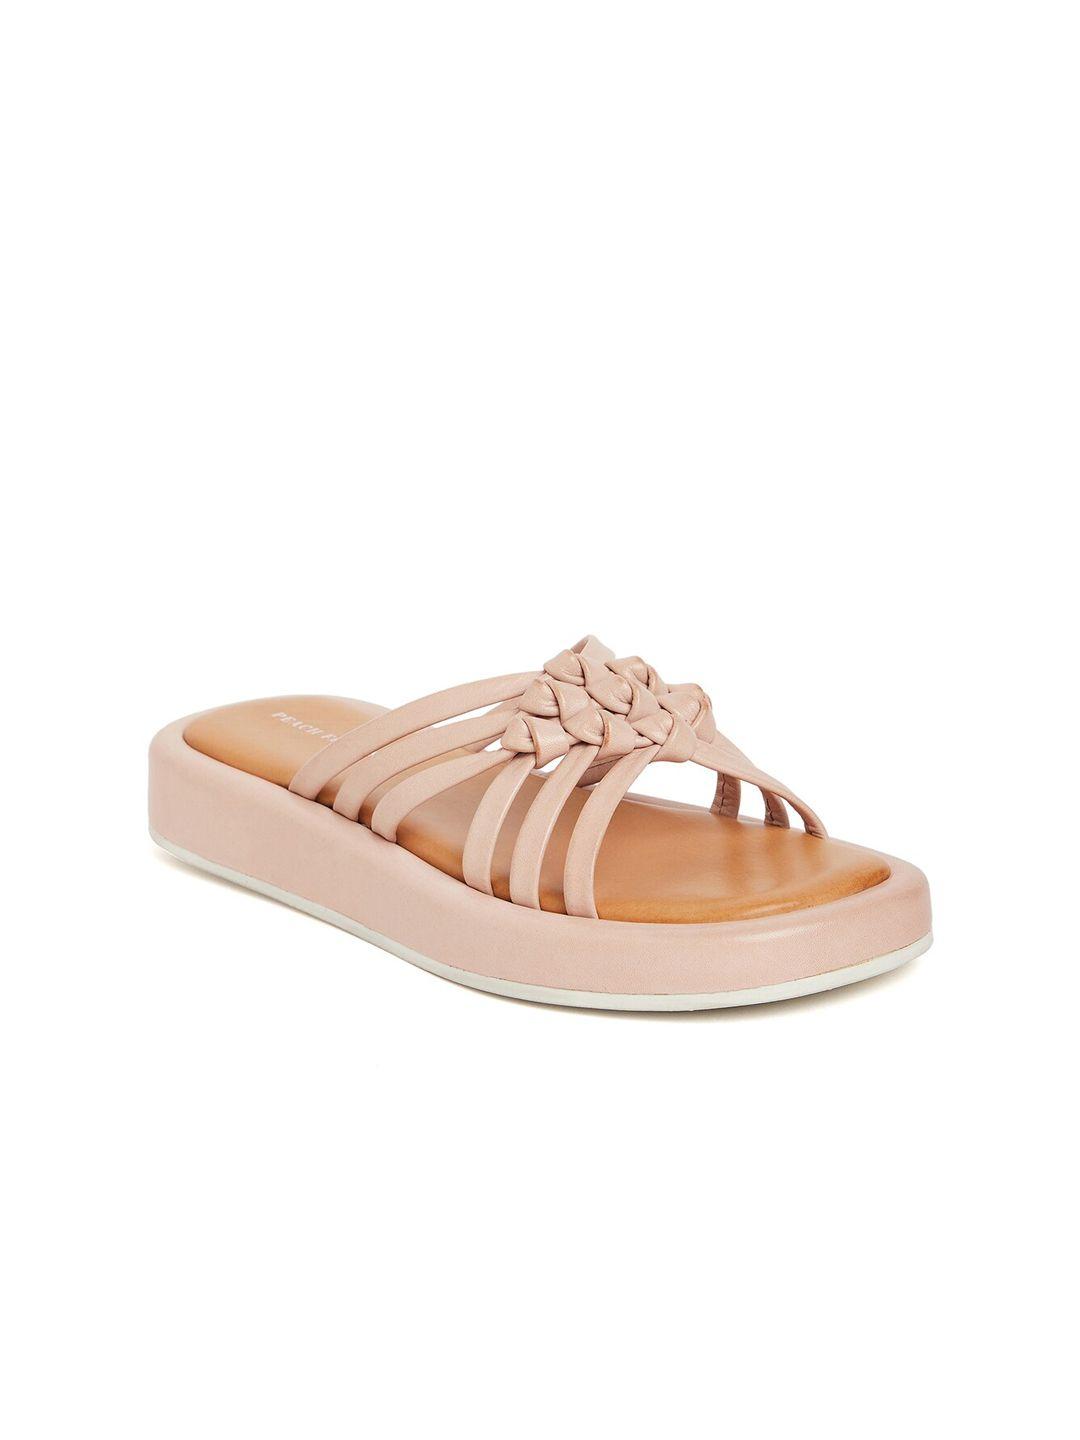 peach flores knotted leather open toe flats